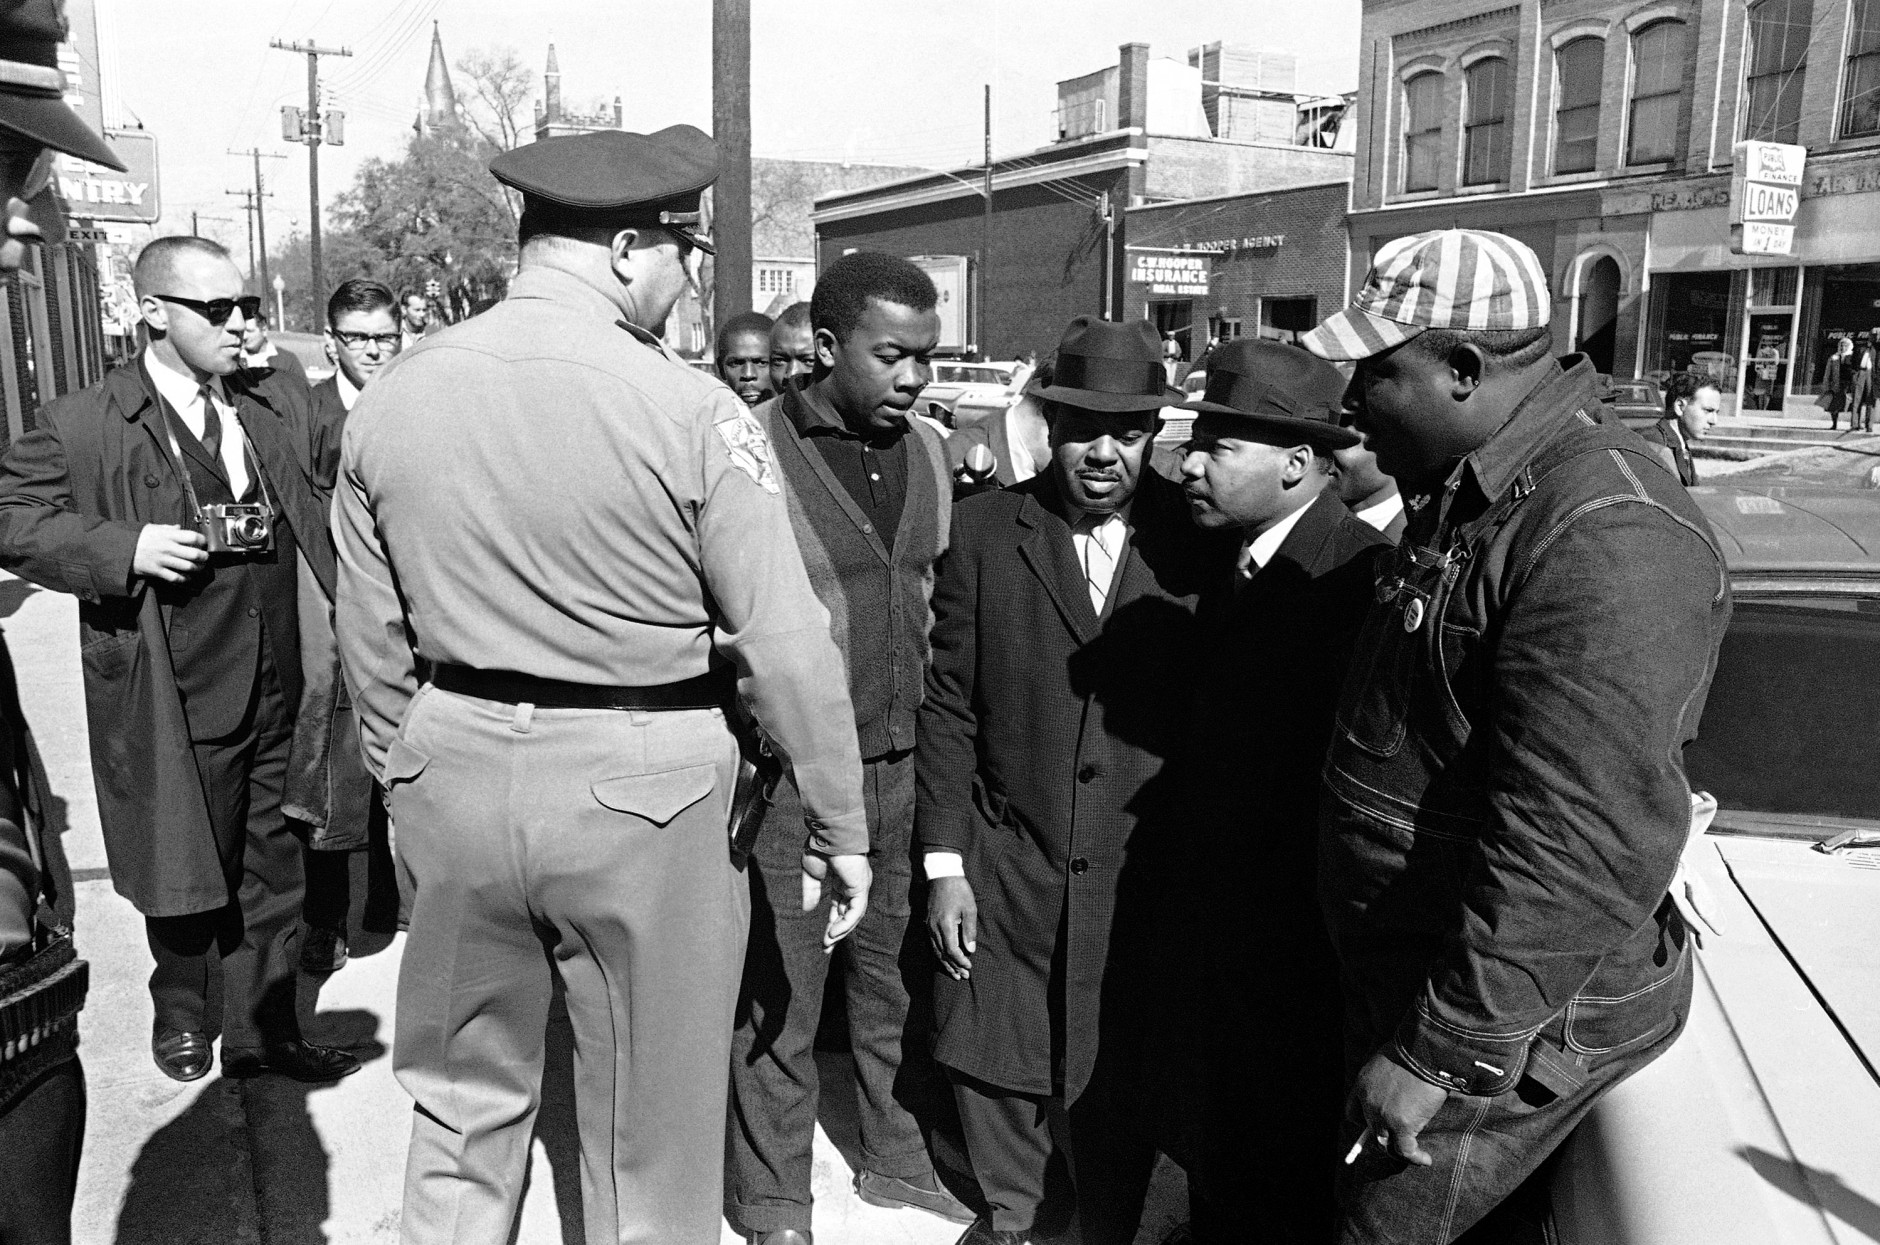 Dr. Martin Luther King Jr., right, and Dallas County Sheriff Jim Clark glare at each other in Selma, Alabama on Jan. 26, 1965 as the sheriff orders King to stand off of sidewalk as he watches African Americans stand in line to register to vote. The sheriff kept everyone from blocking the sidewalk. Several incidents broke out and several were arrested. (AP Photo/Horace Cort)